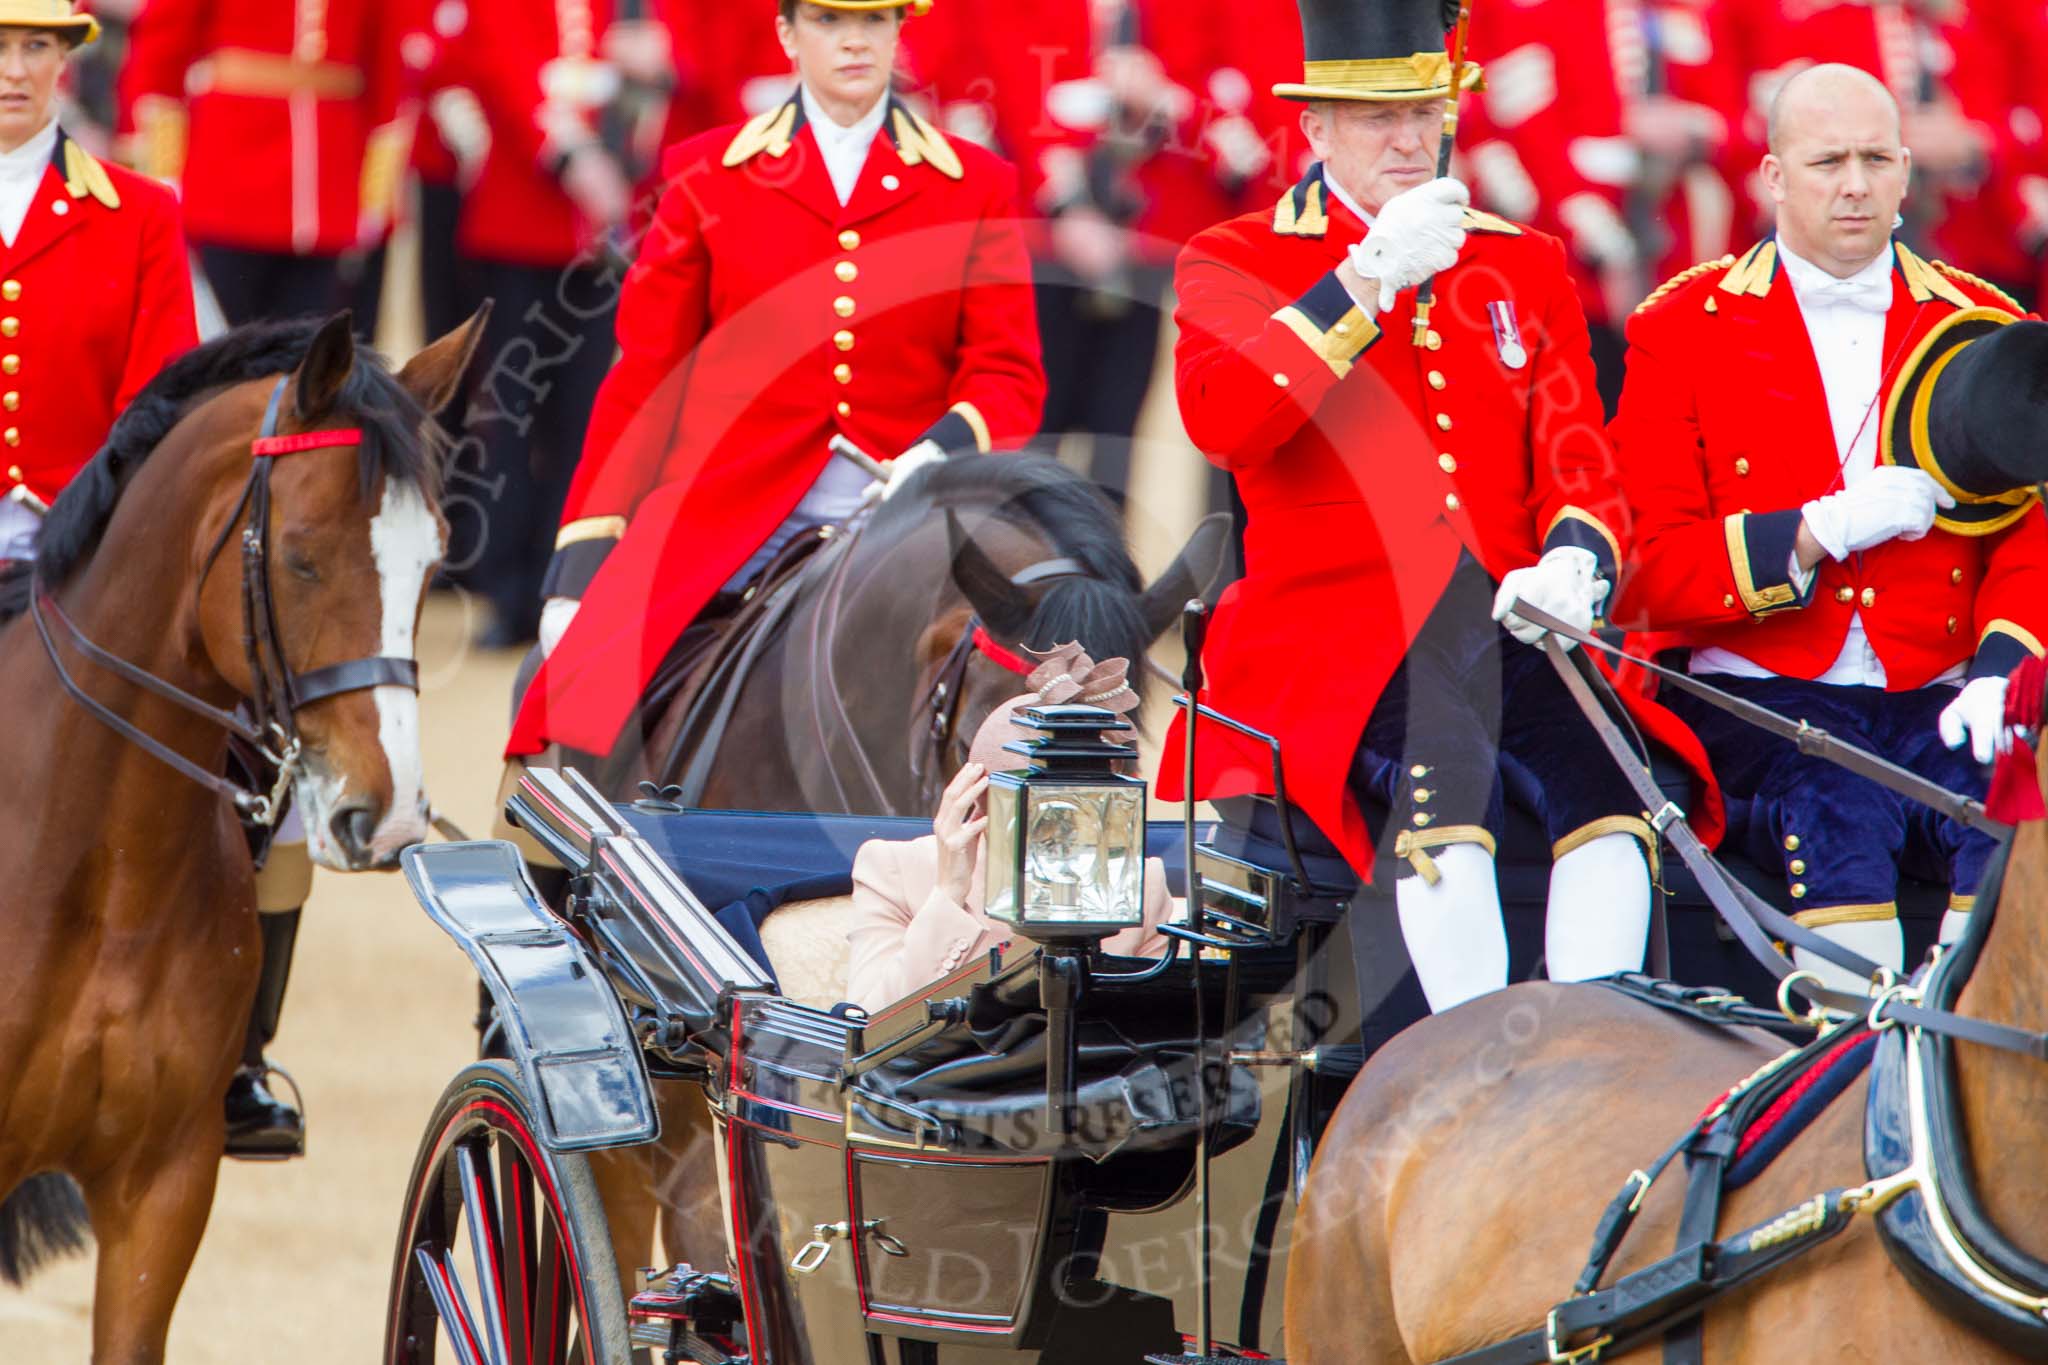 Trooping the Colour 2013: The coachmen salute when passing the Colour. Image #208, 15 June 2013 10:50 Horse Guards Parade, London, UK